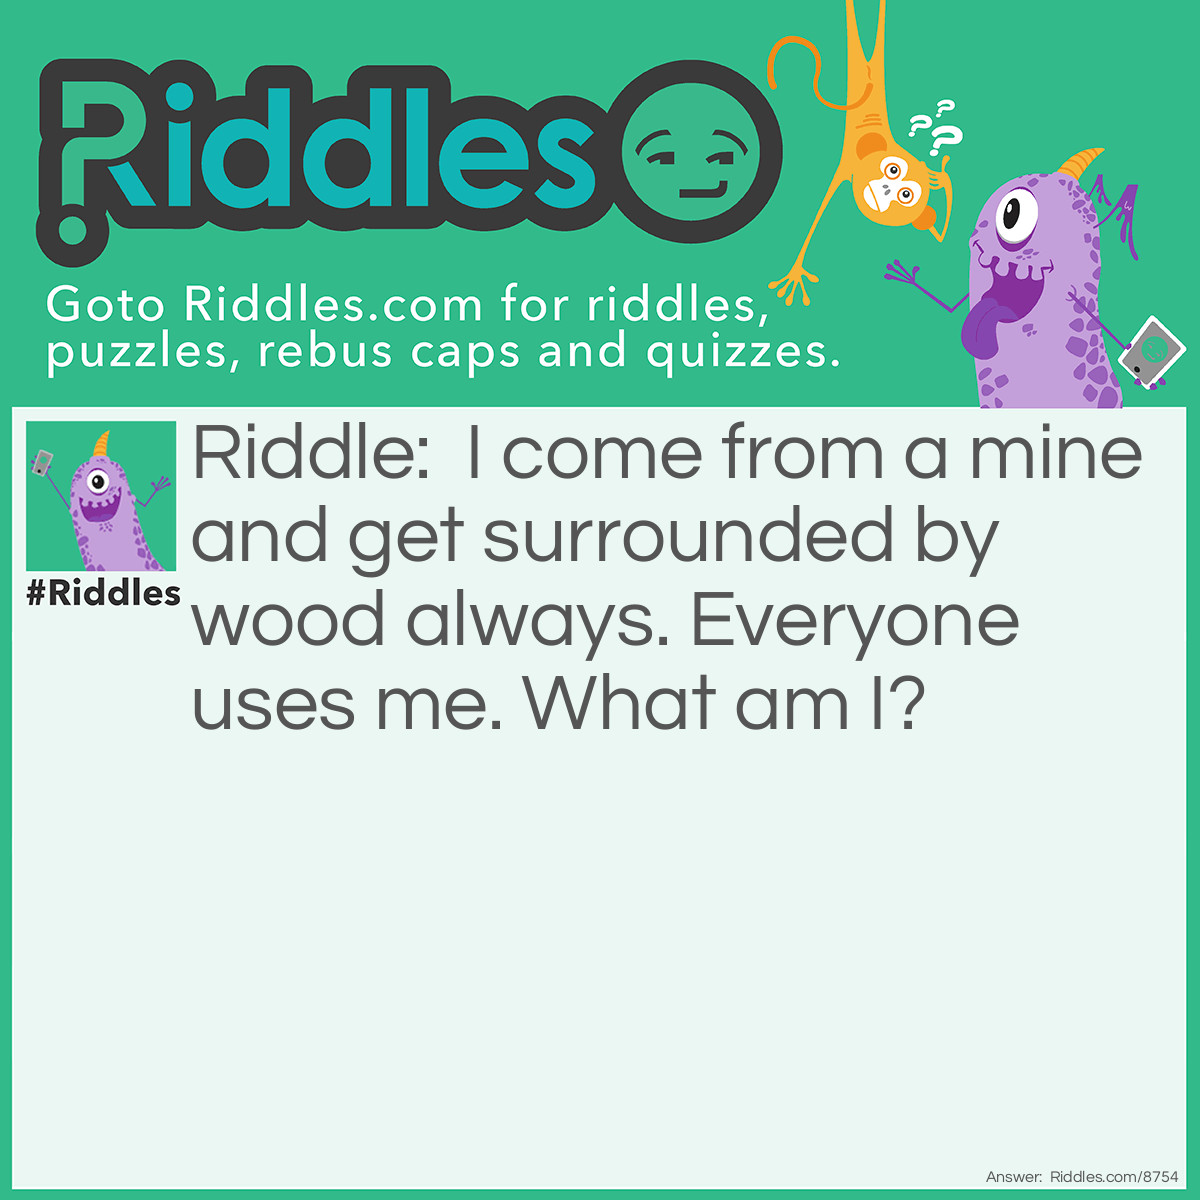 Riddle: I come from a mine and get surrounded by wood always. Everyone uses me. What am I? Answer: Pencil lead (and the pencil)